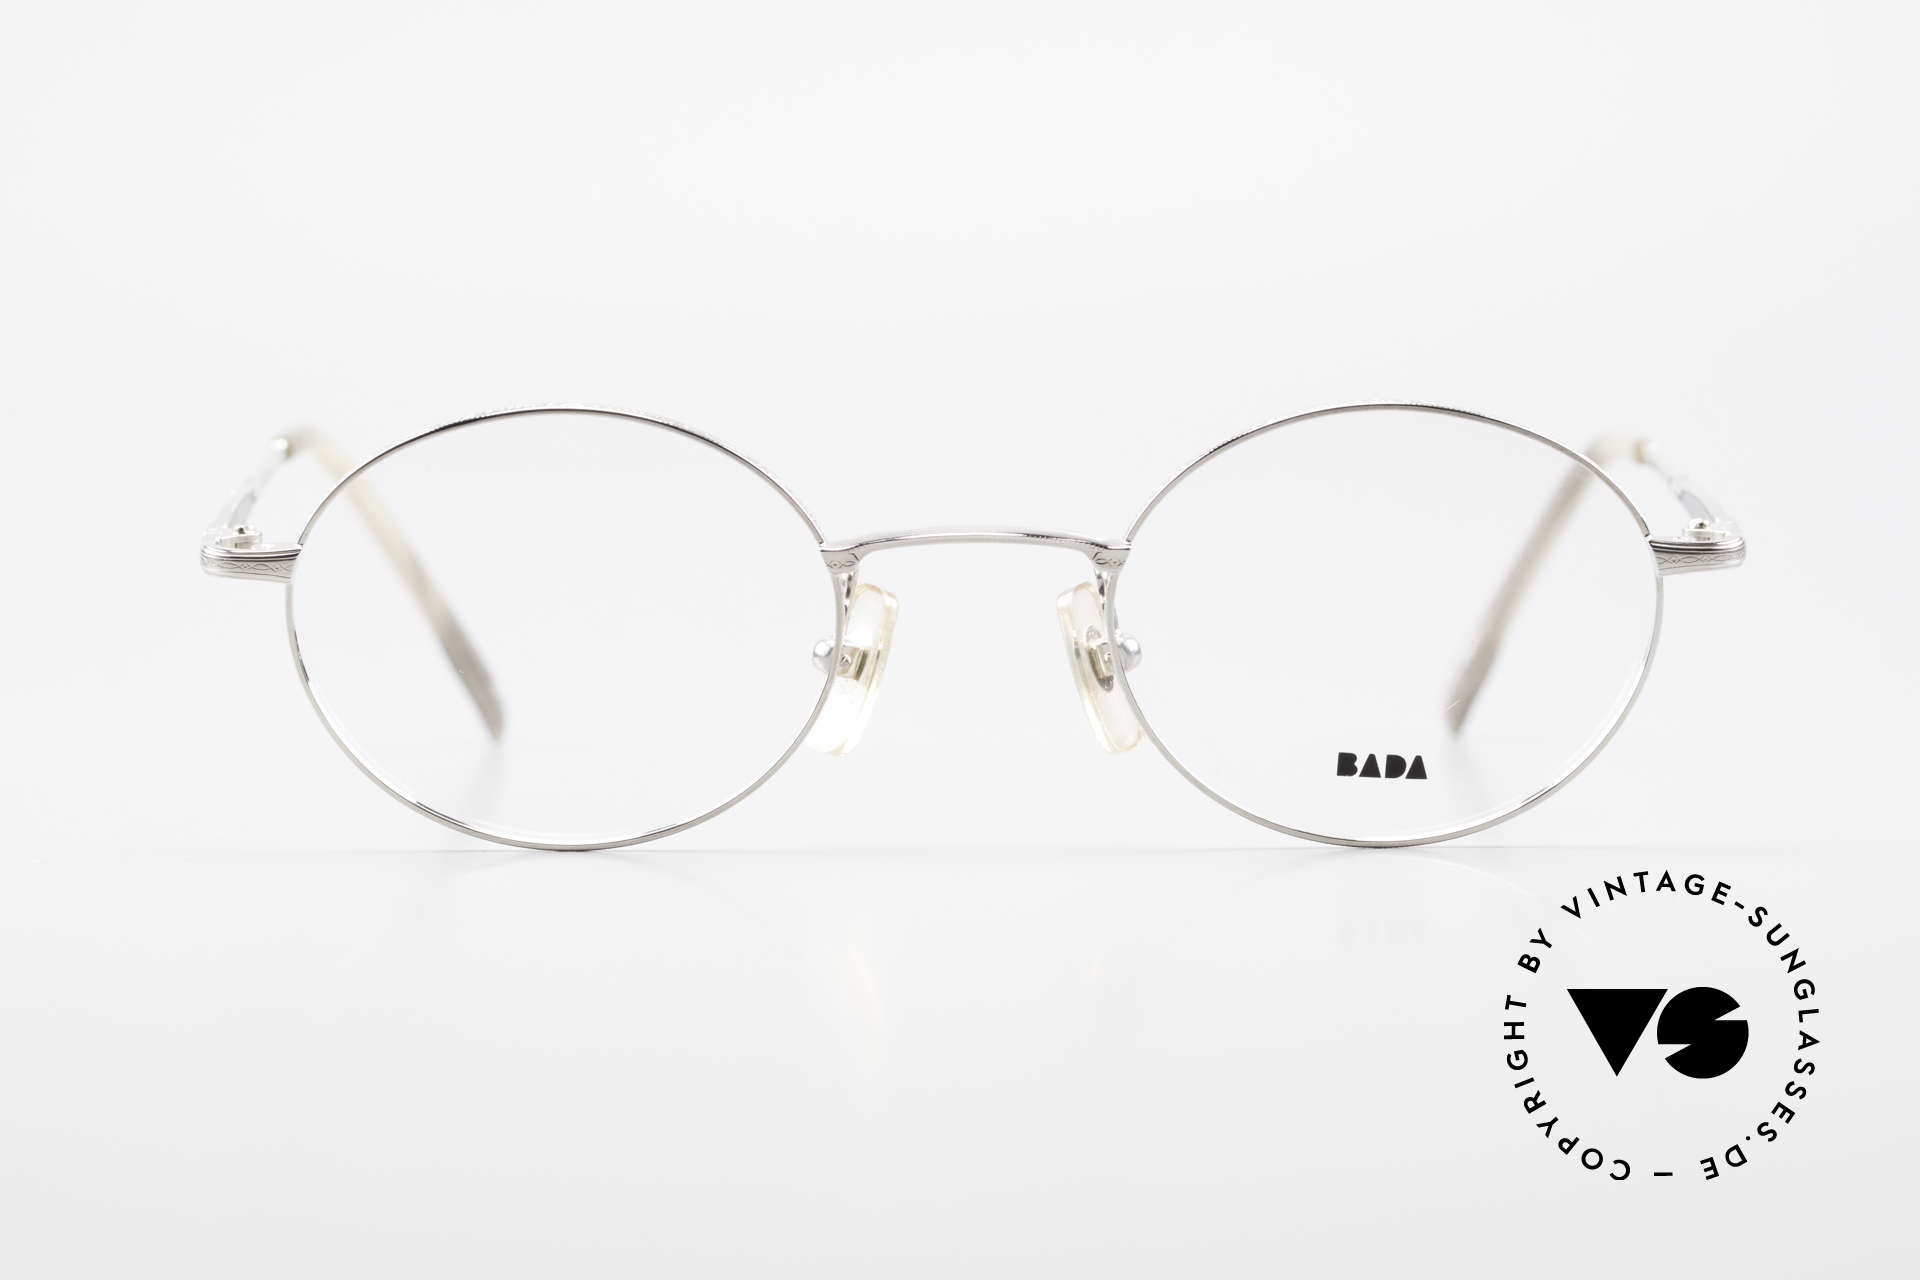 Bada BL1581 90's Eyeglasses With Clip On, Size: small, Made for Men and Women